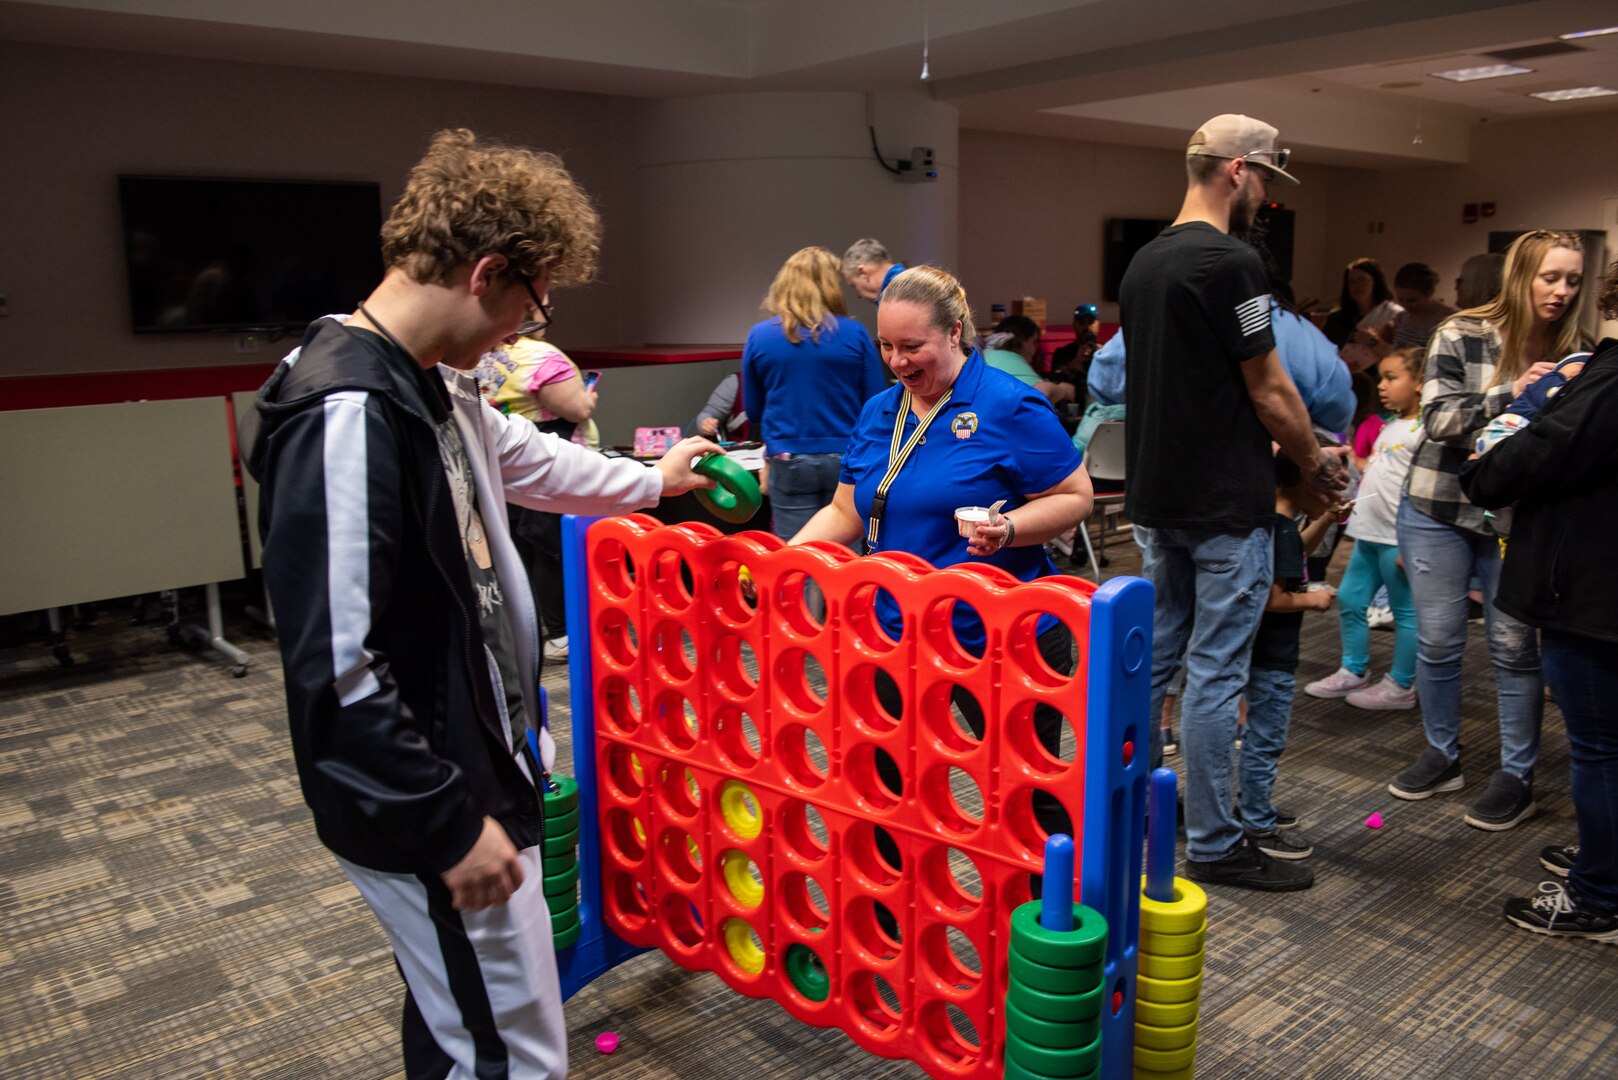 Several people play a life size Connect Four game inside a room. with grey carpet.